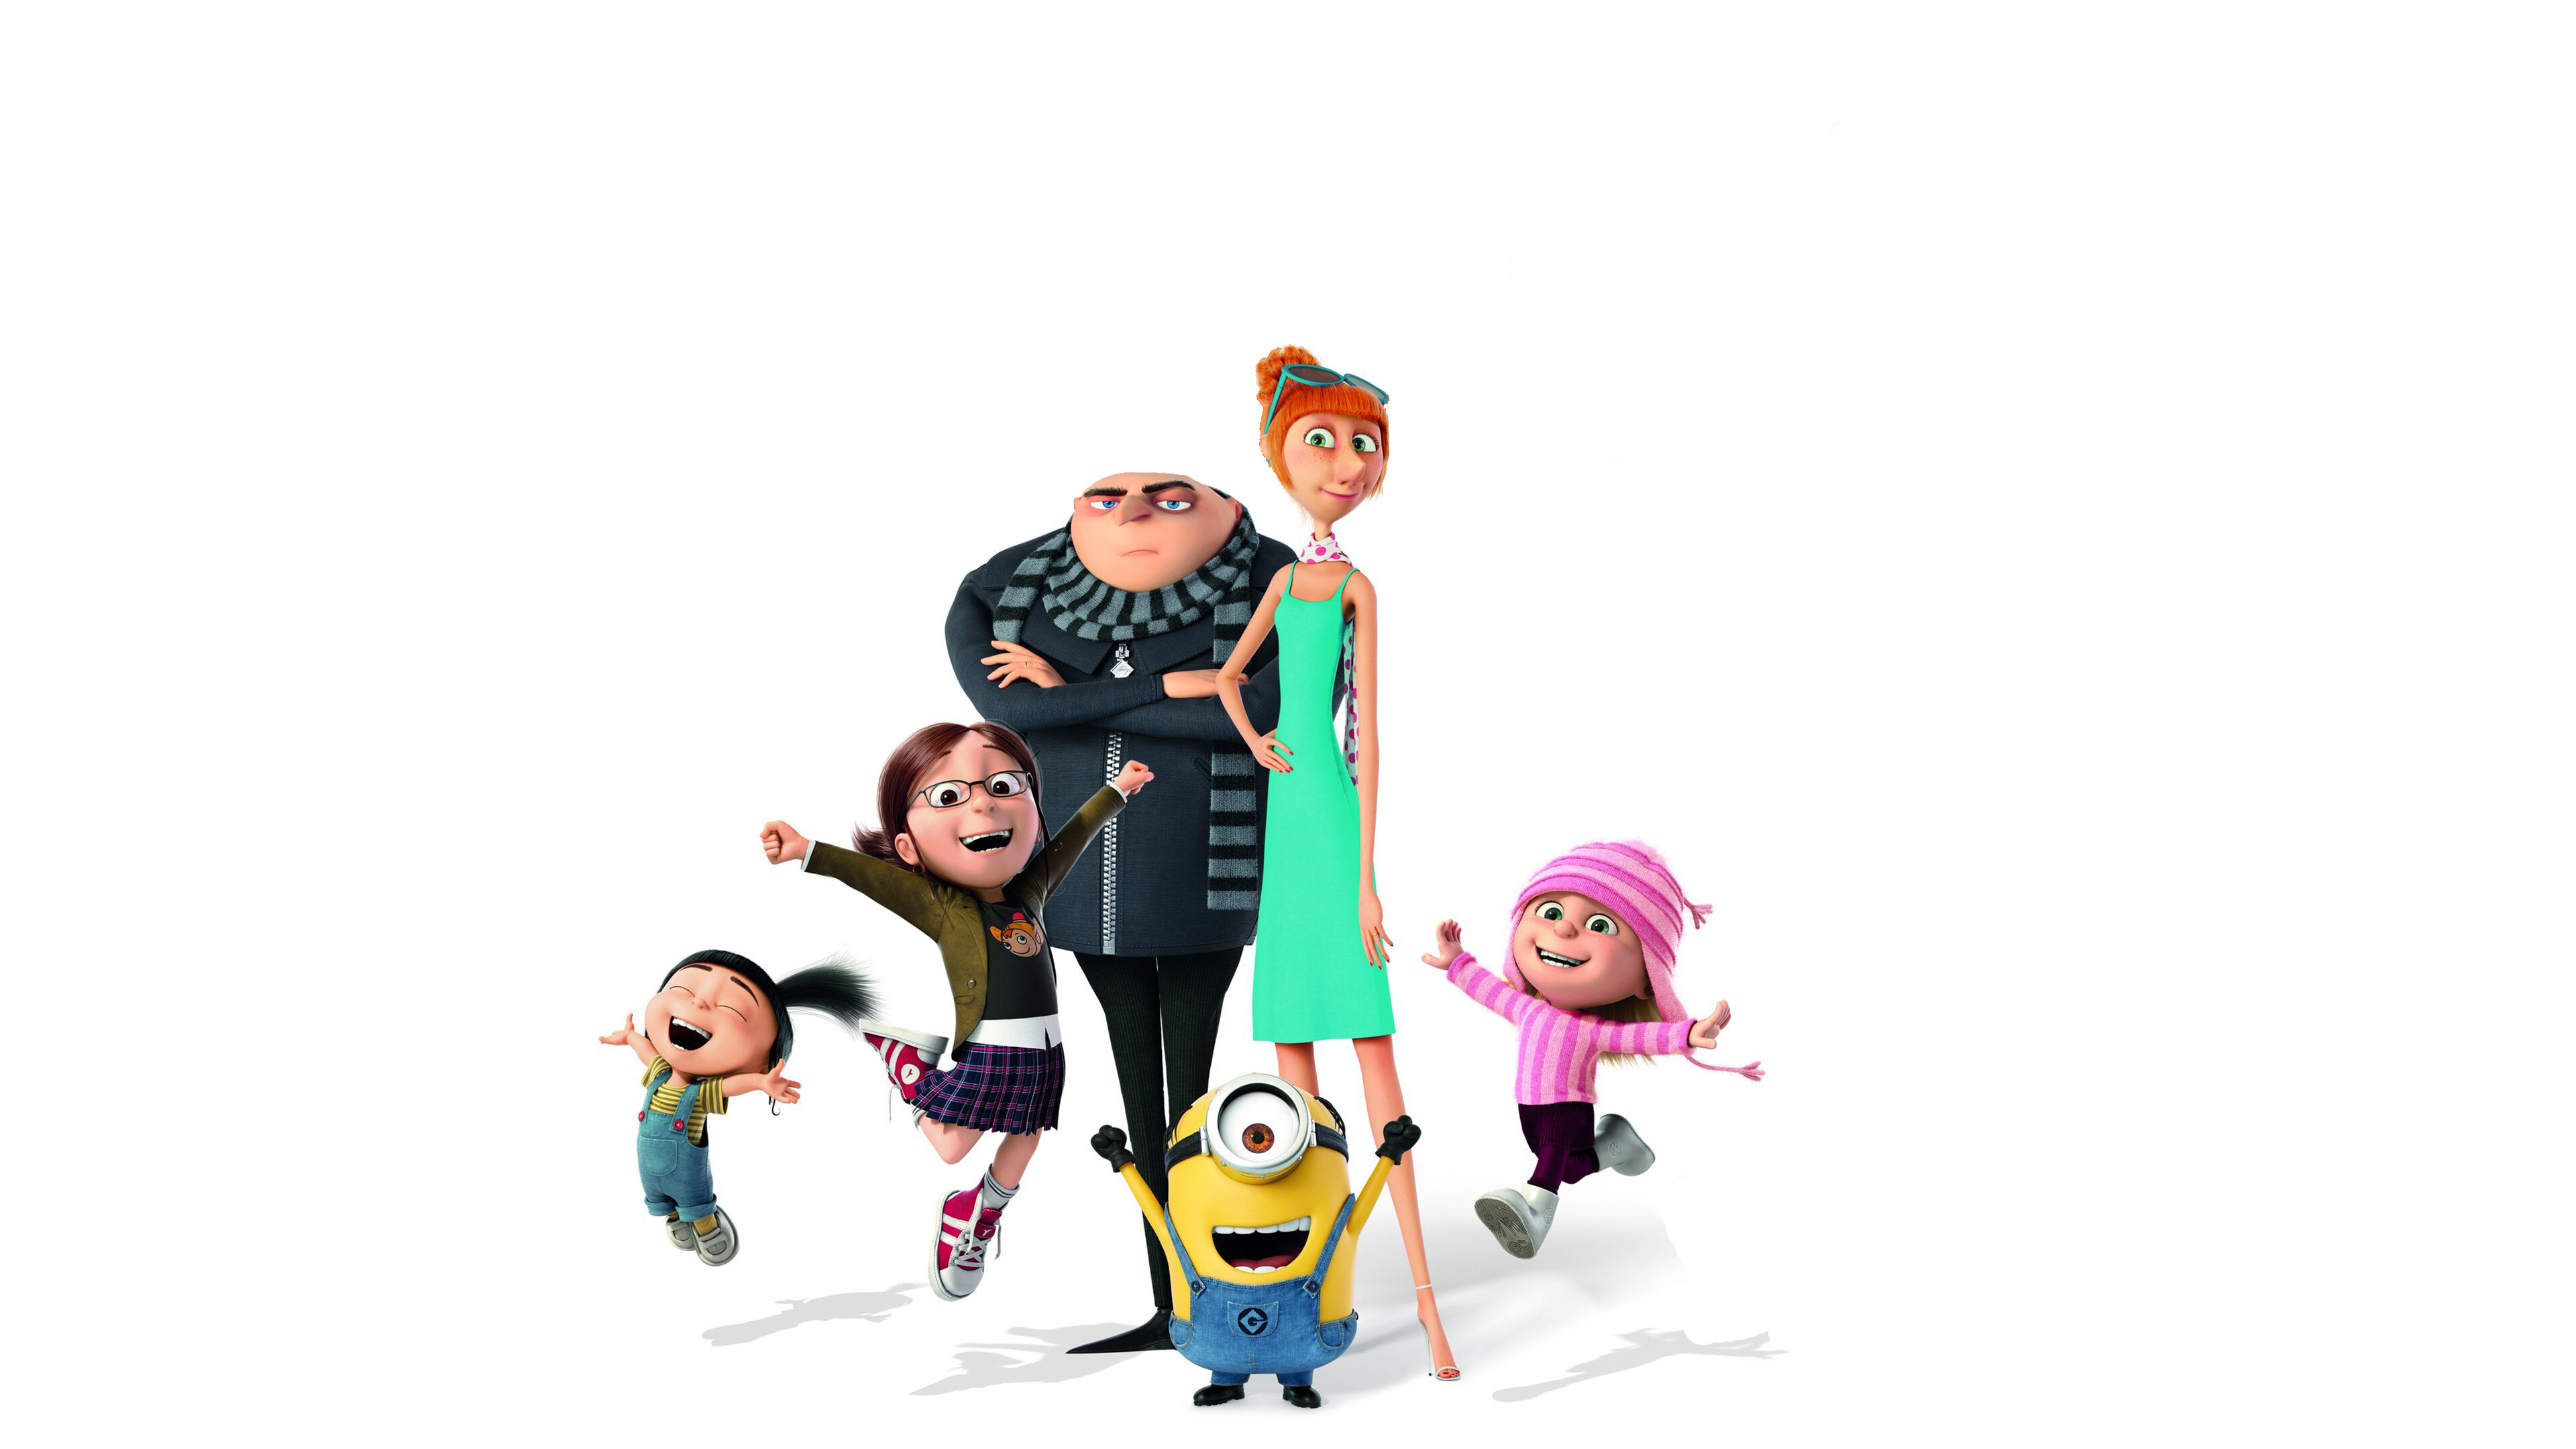 Despicable Me: A 2017 American computer-animated comedy film, Movies. 3840x2160 4K Wallpaper.